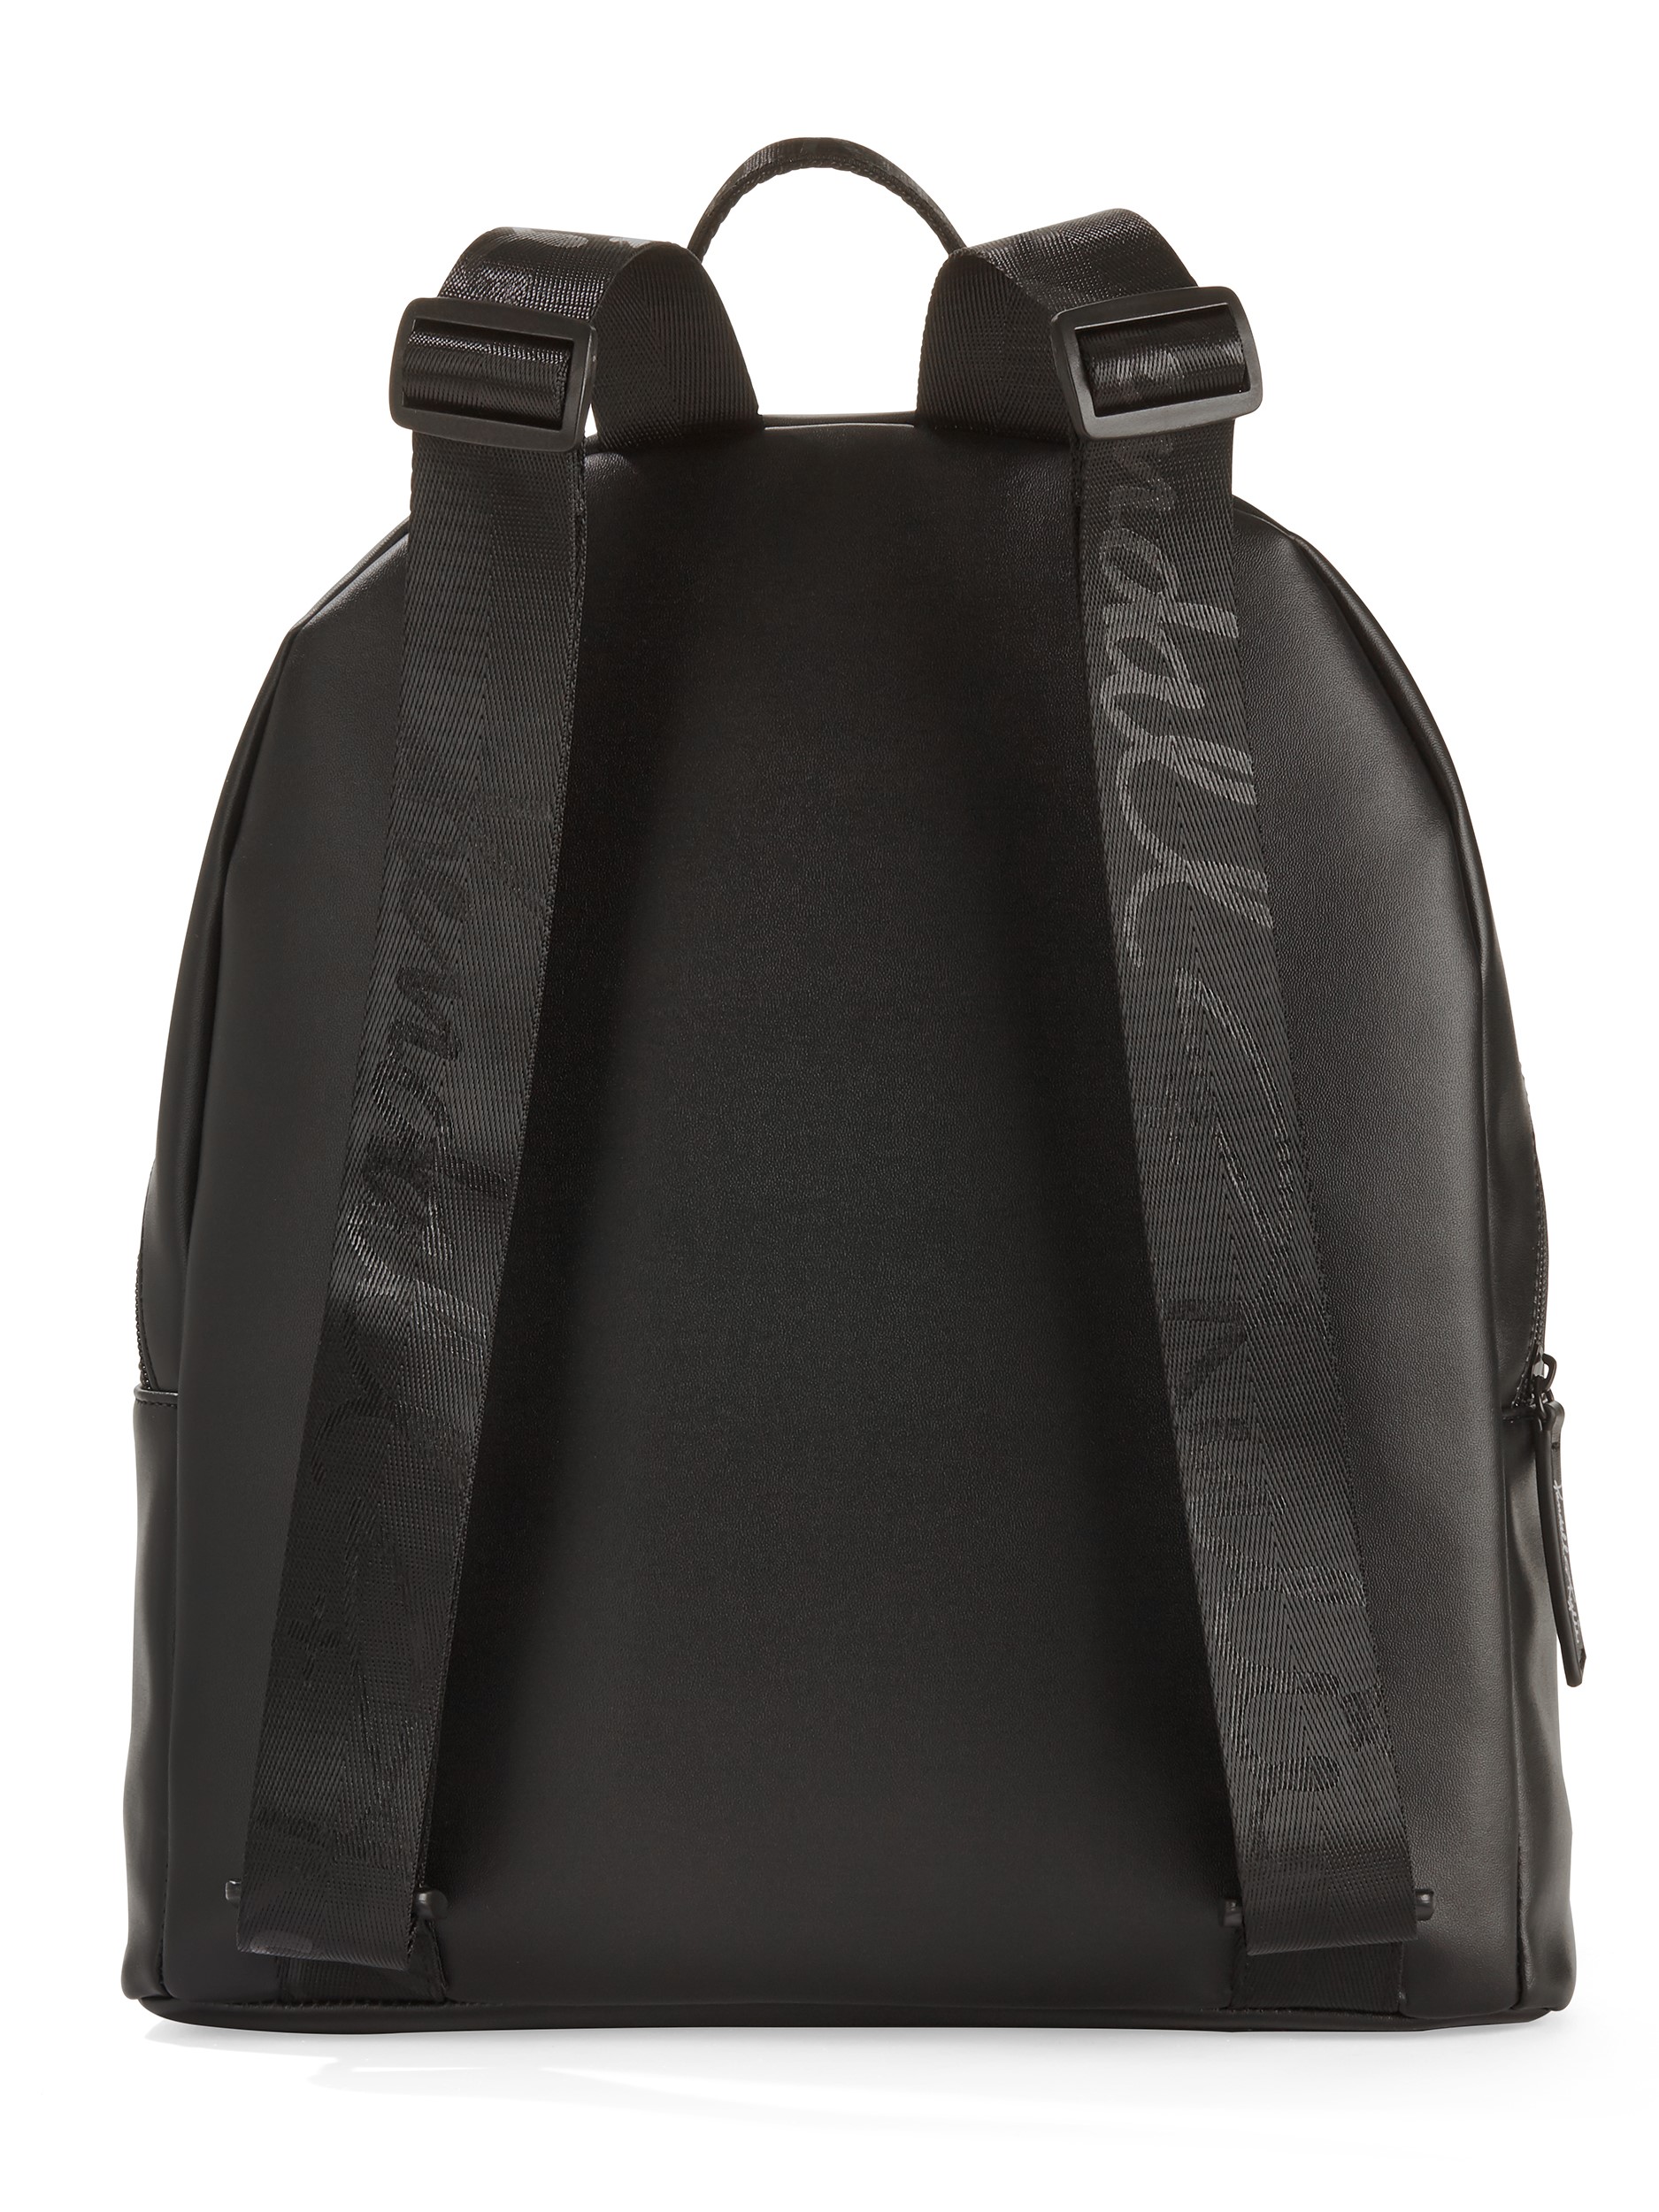 Kendall + Kylie for Walmart Large Backpack with Pom - image 2 of 5